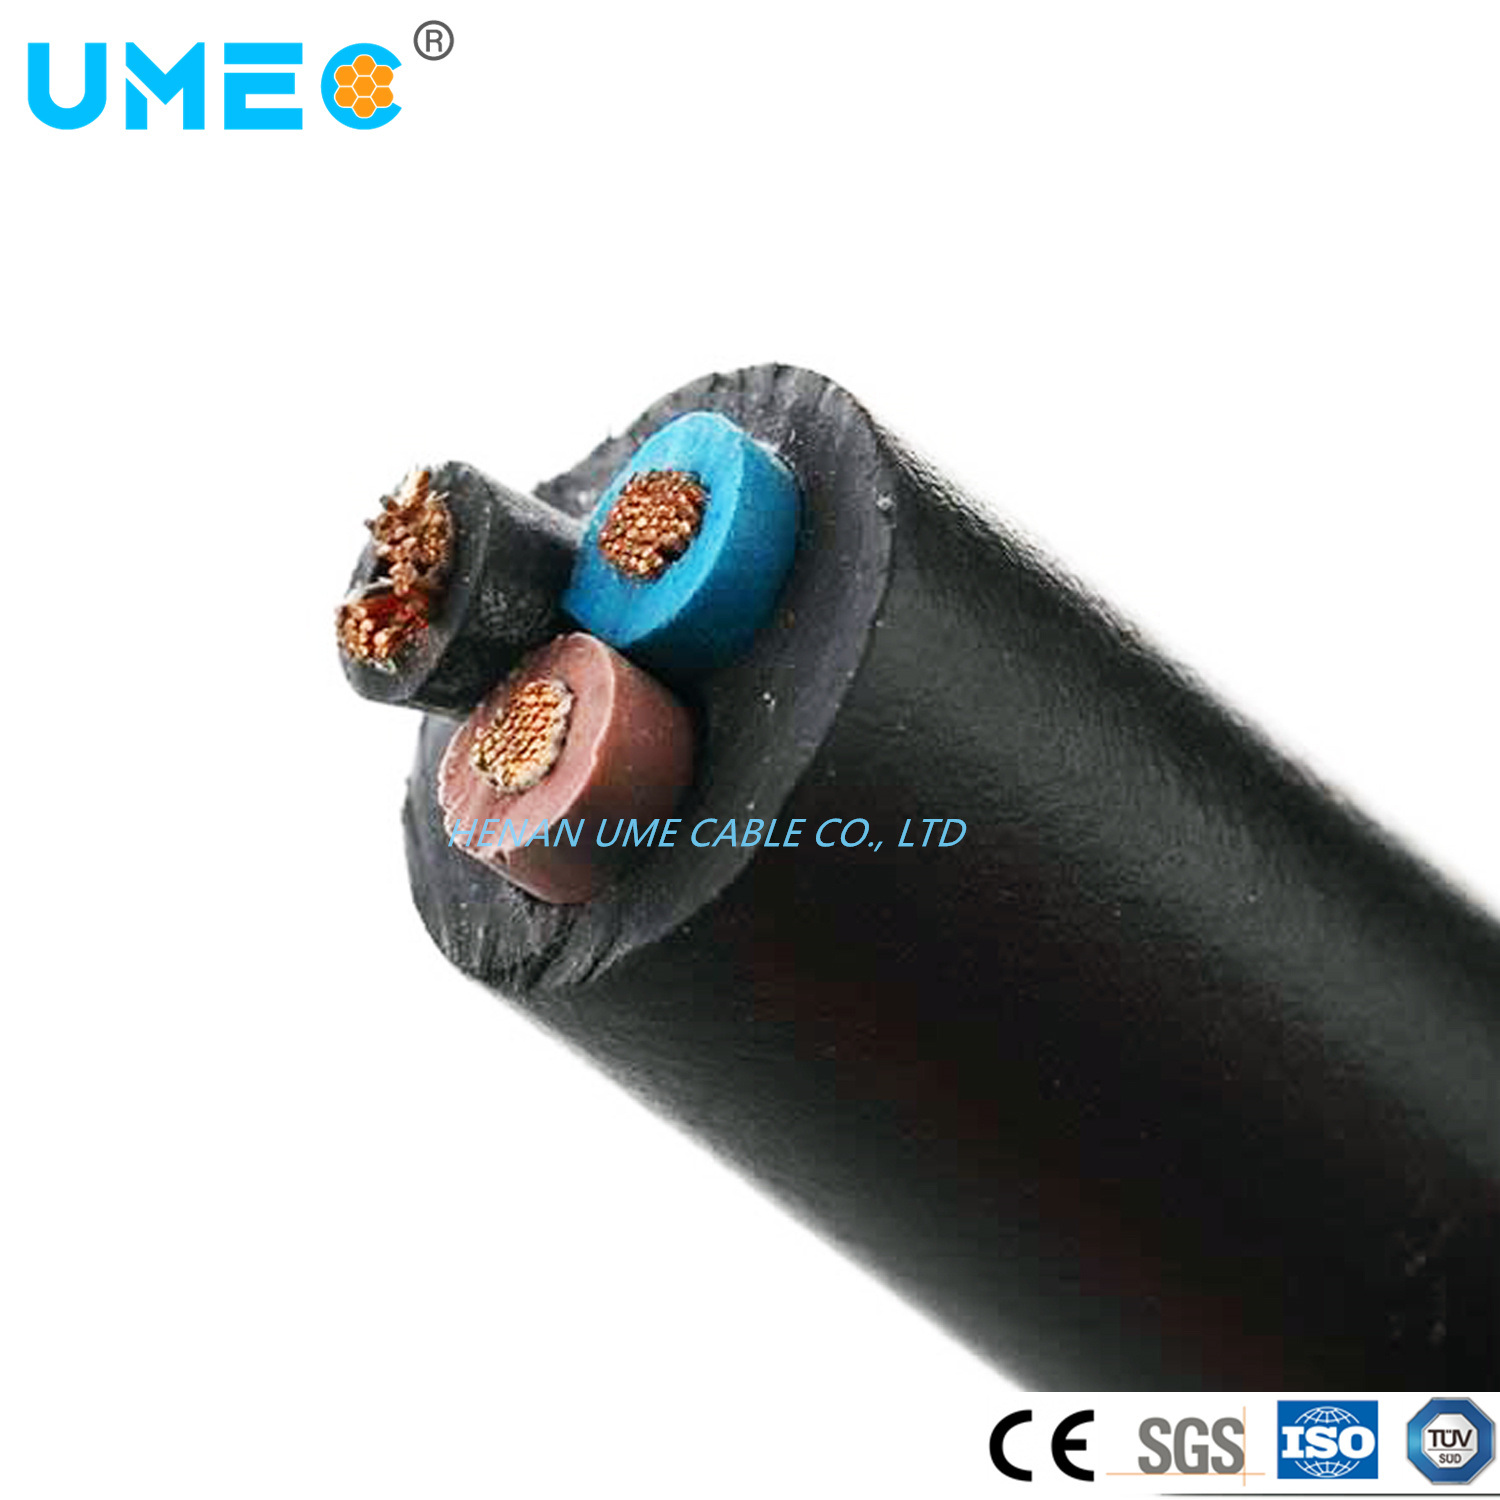 Wholesale Electrical Heavy Standard Construction Rubber Cable H07rn-F 3qx1.5mm2 4gx2.5mm2 Electric Cable